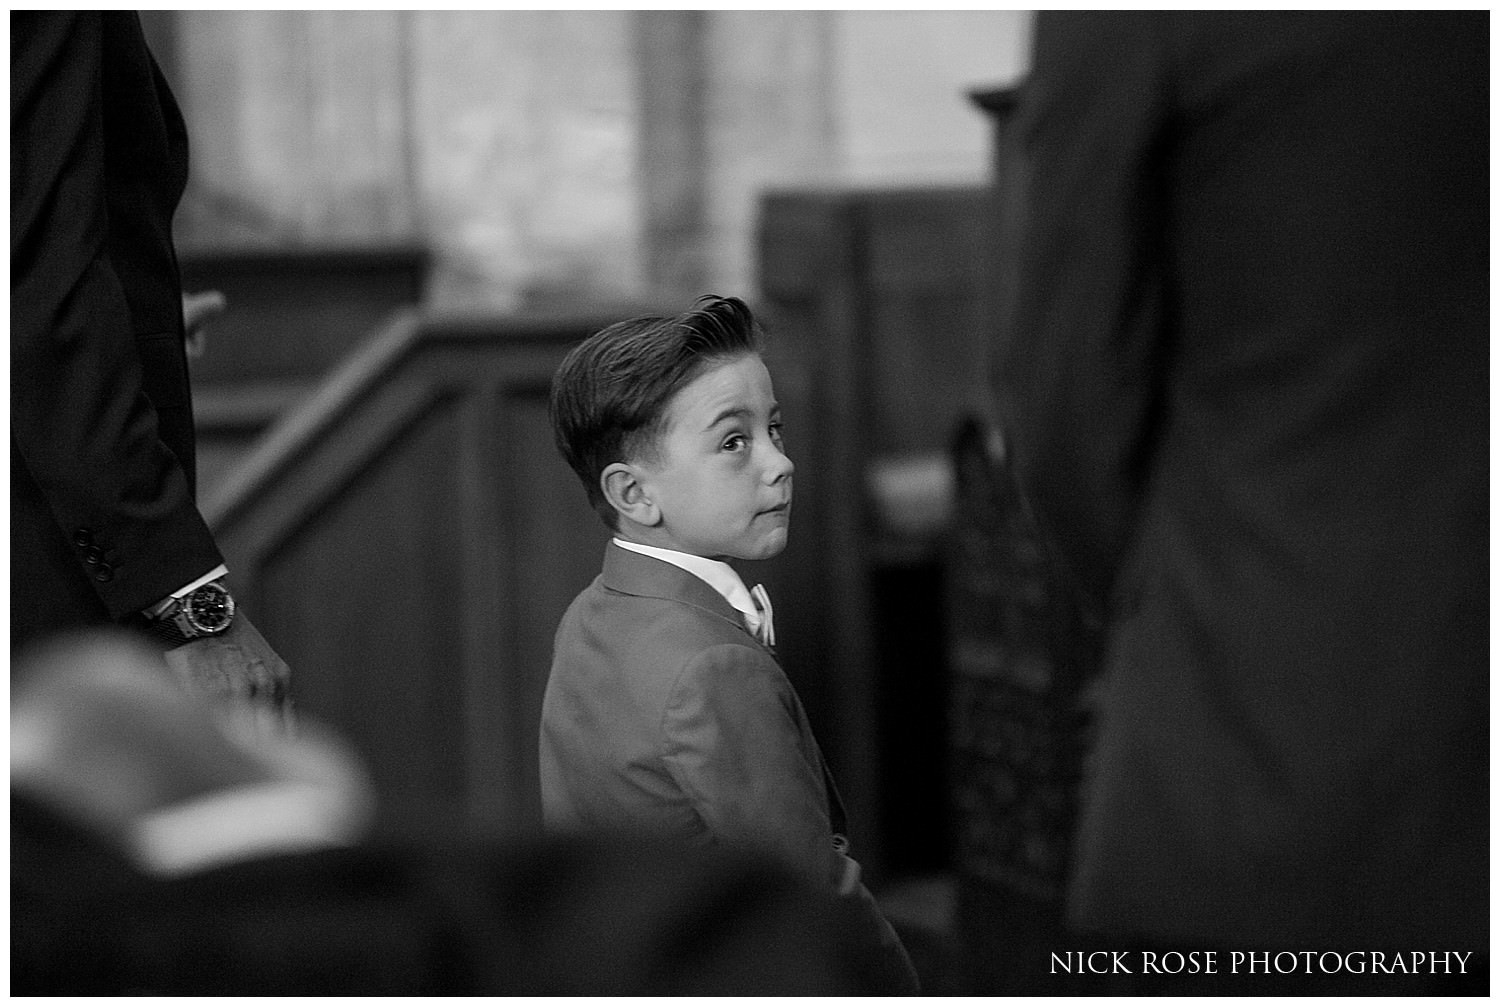  Boy looking at bride and groom during a Yorkshire wedding service at St Mary's in Tickhill 